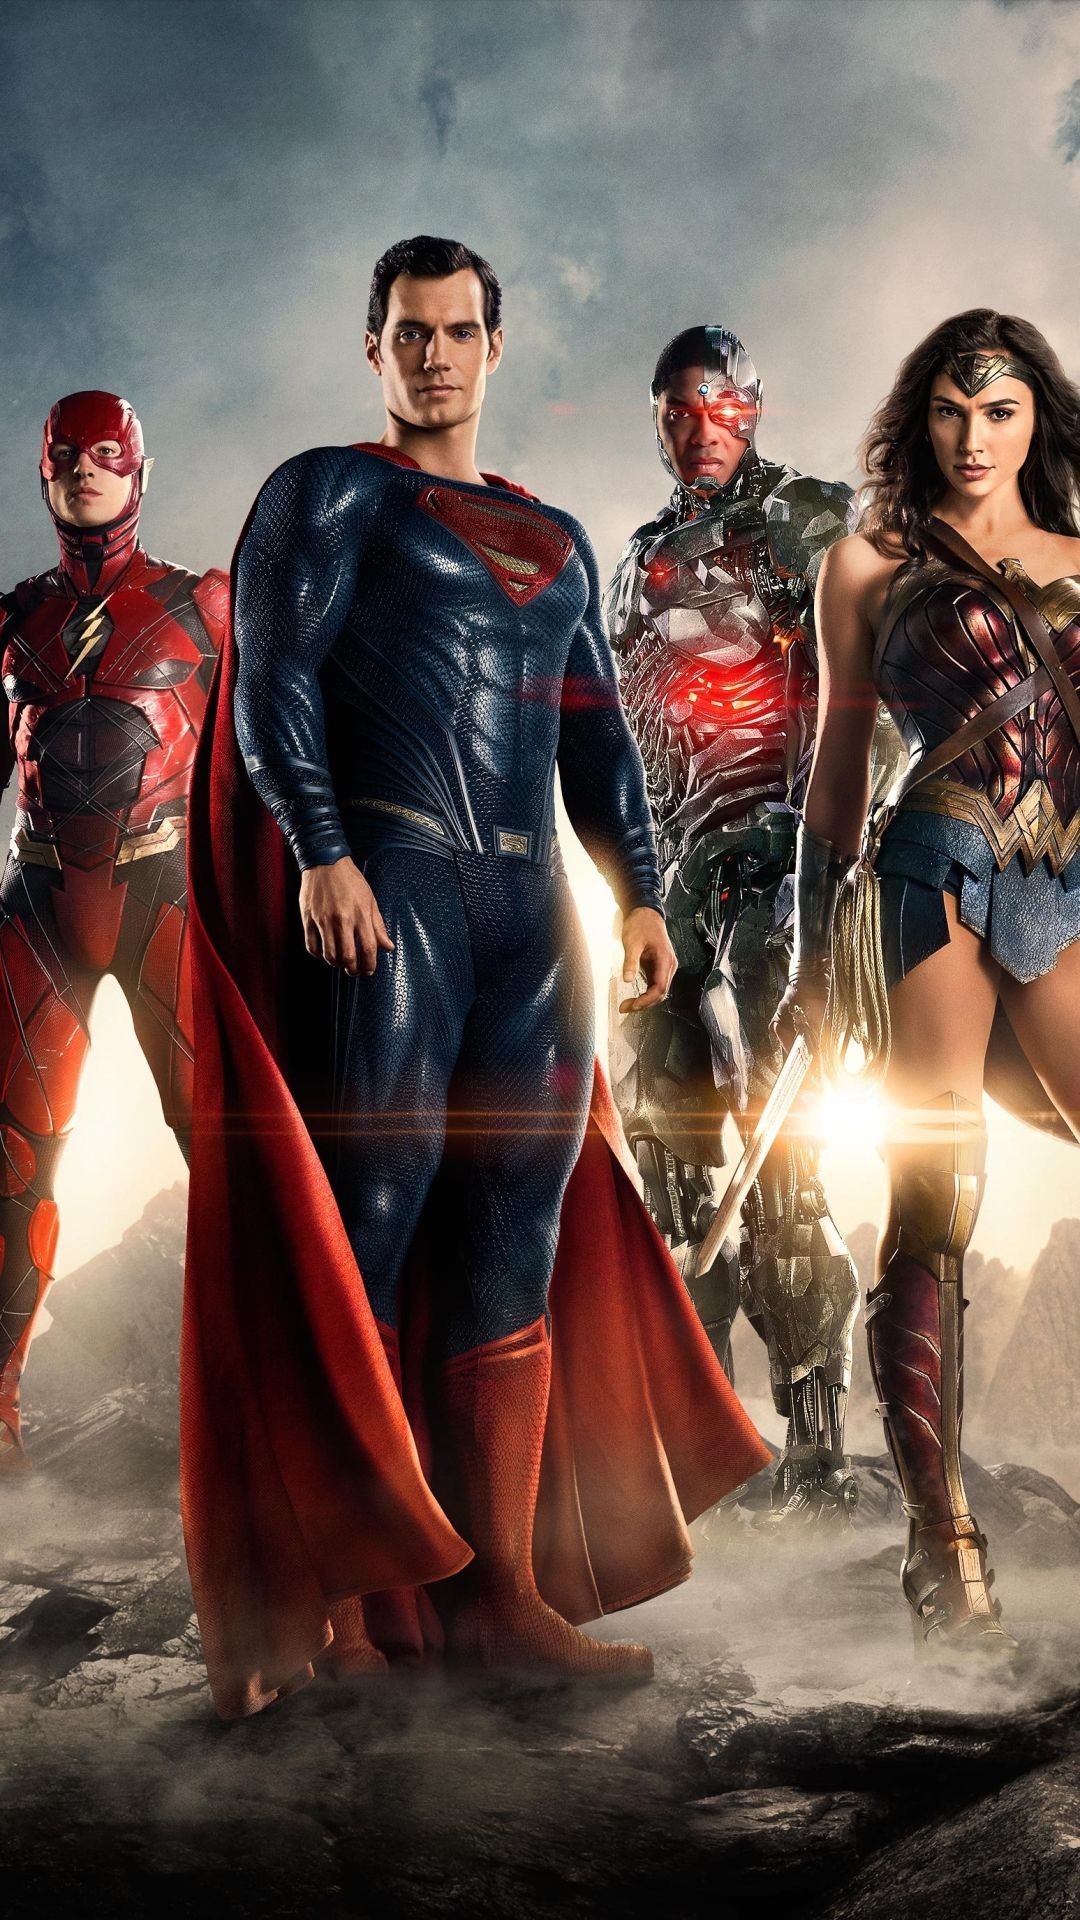 1080x1920 iPhone 7 Plus - Movie/Justice League (2017) - Wallpaper ID: 637851